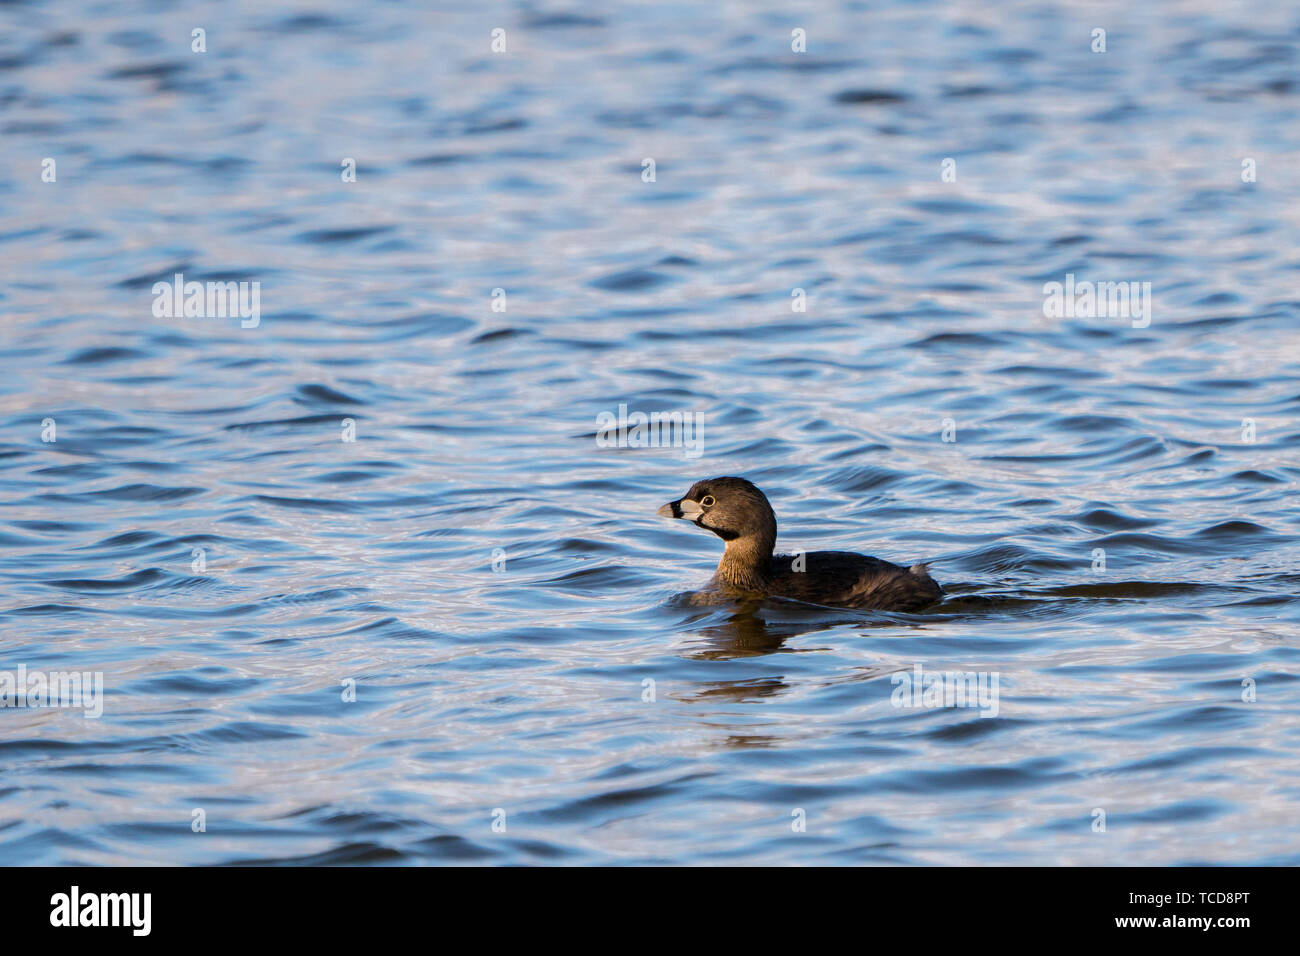 Side view of brown duck swimming in rippling lake with reflection on surface Stock Photo